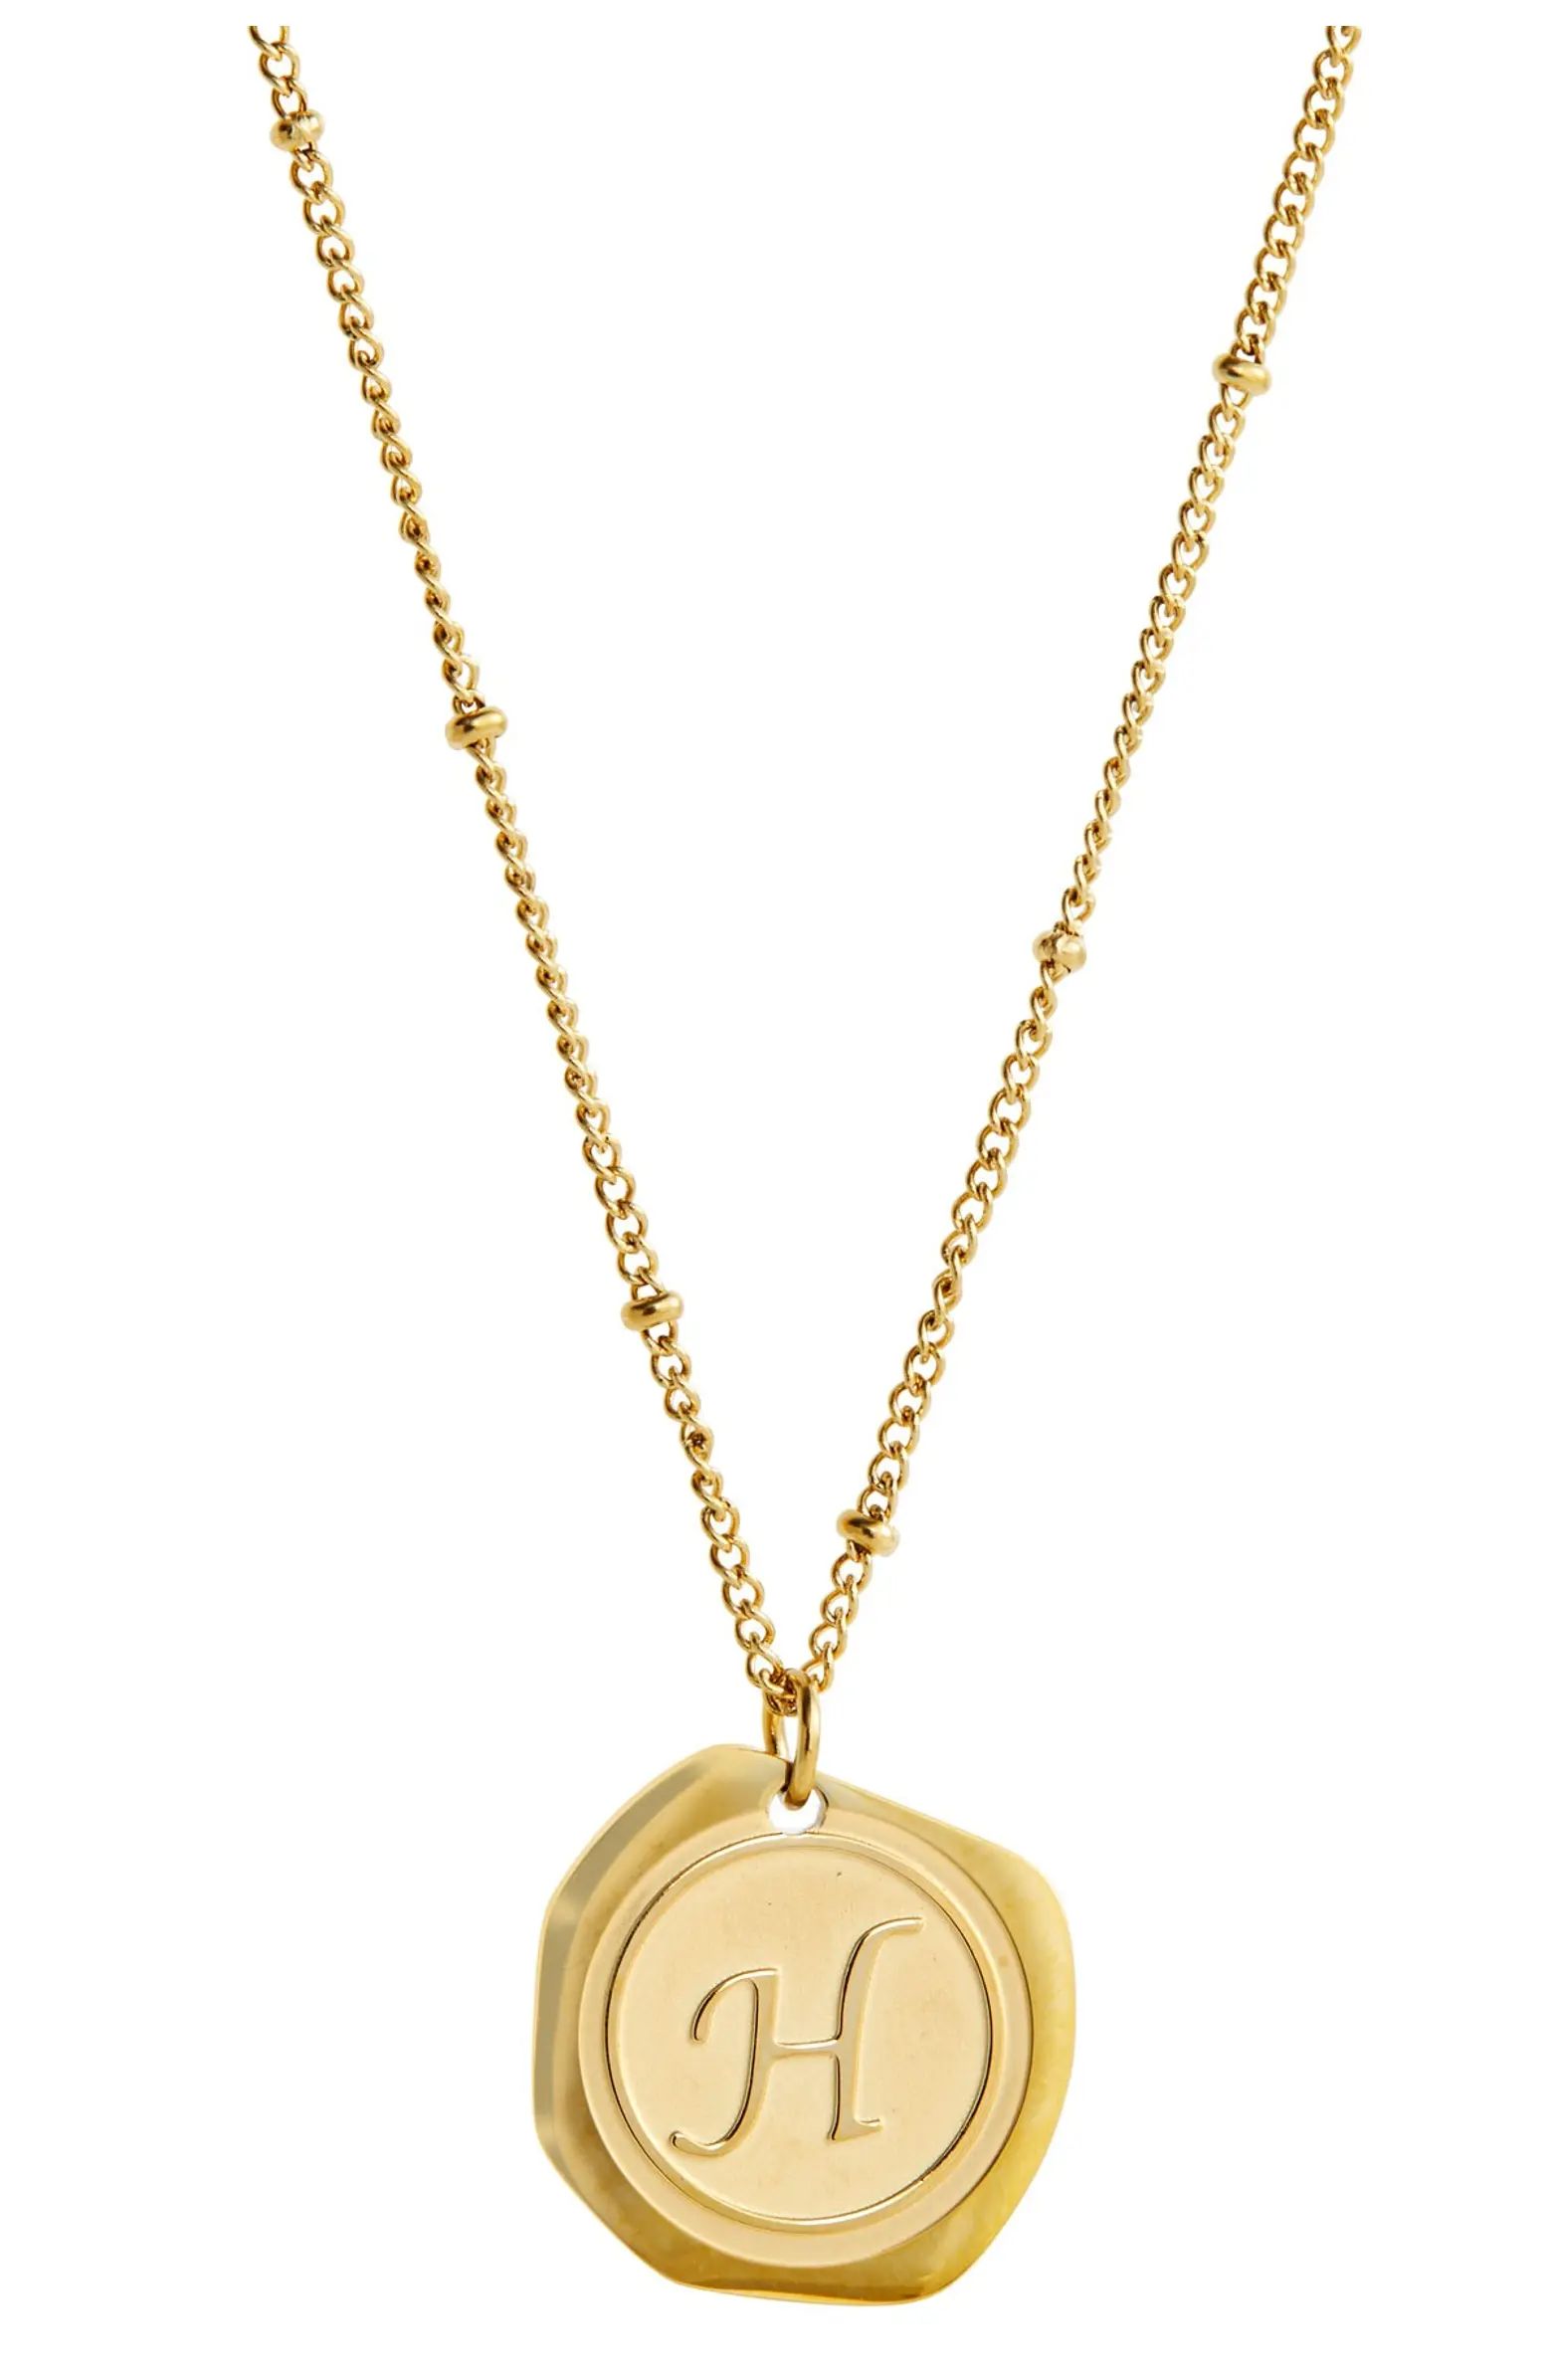 SAVVY CIE JEWELS 22K Yellow Gold Plated Stainless Steel Coin Initial Necklace | Nordstromrack | Nordstrom Rack